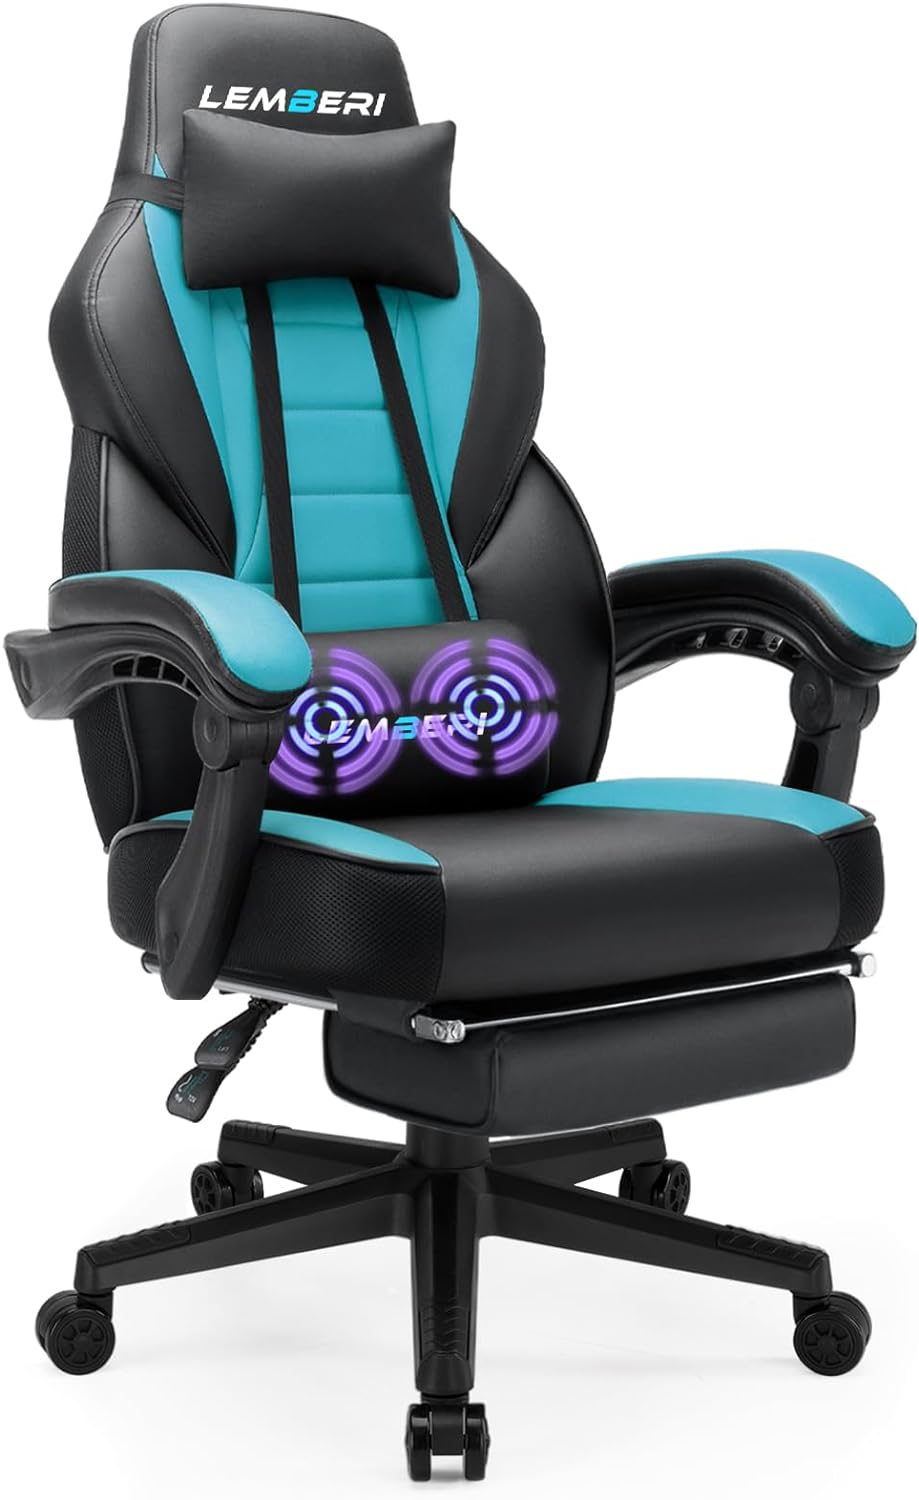 The Ultimate Guide to the Best Gaming Chairs: Top 5 Picks for Your Comfort